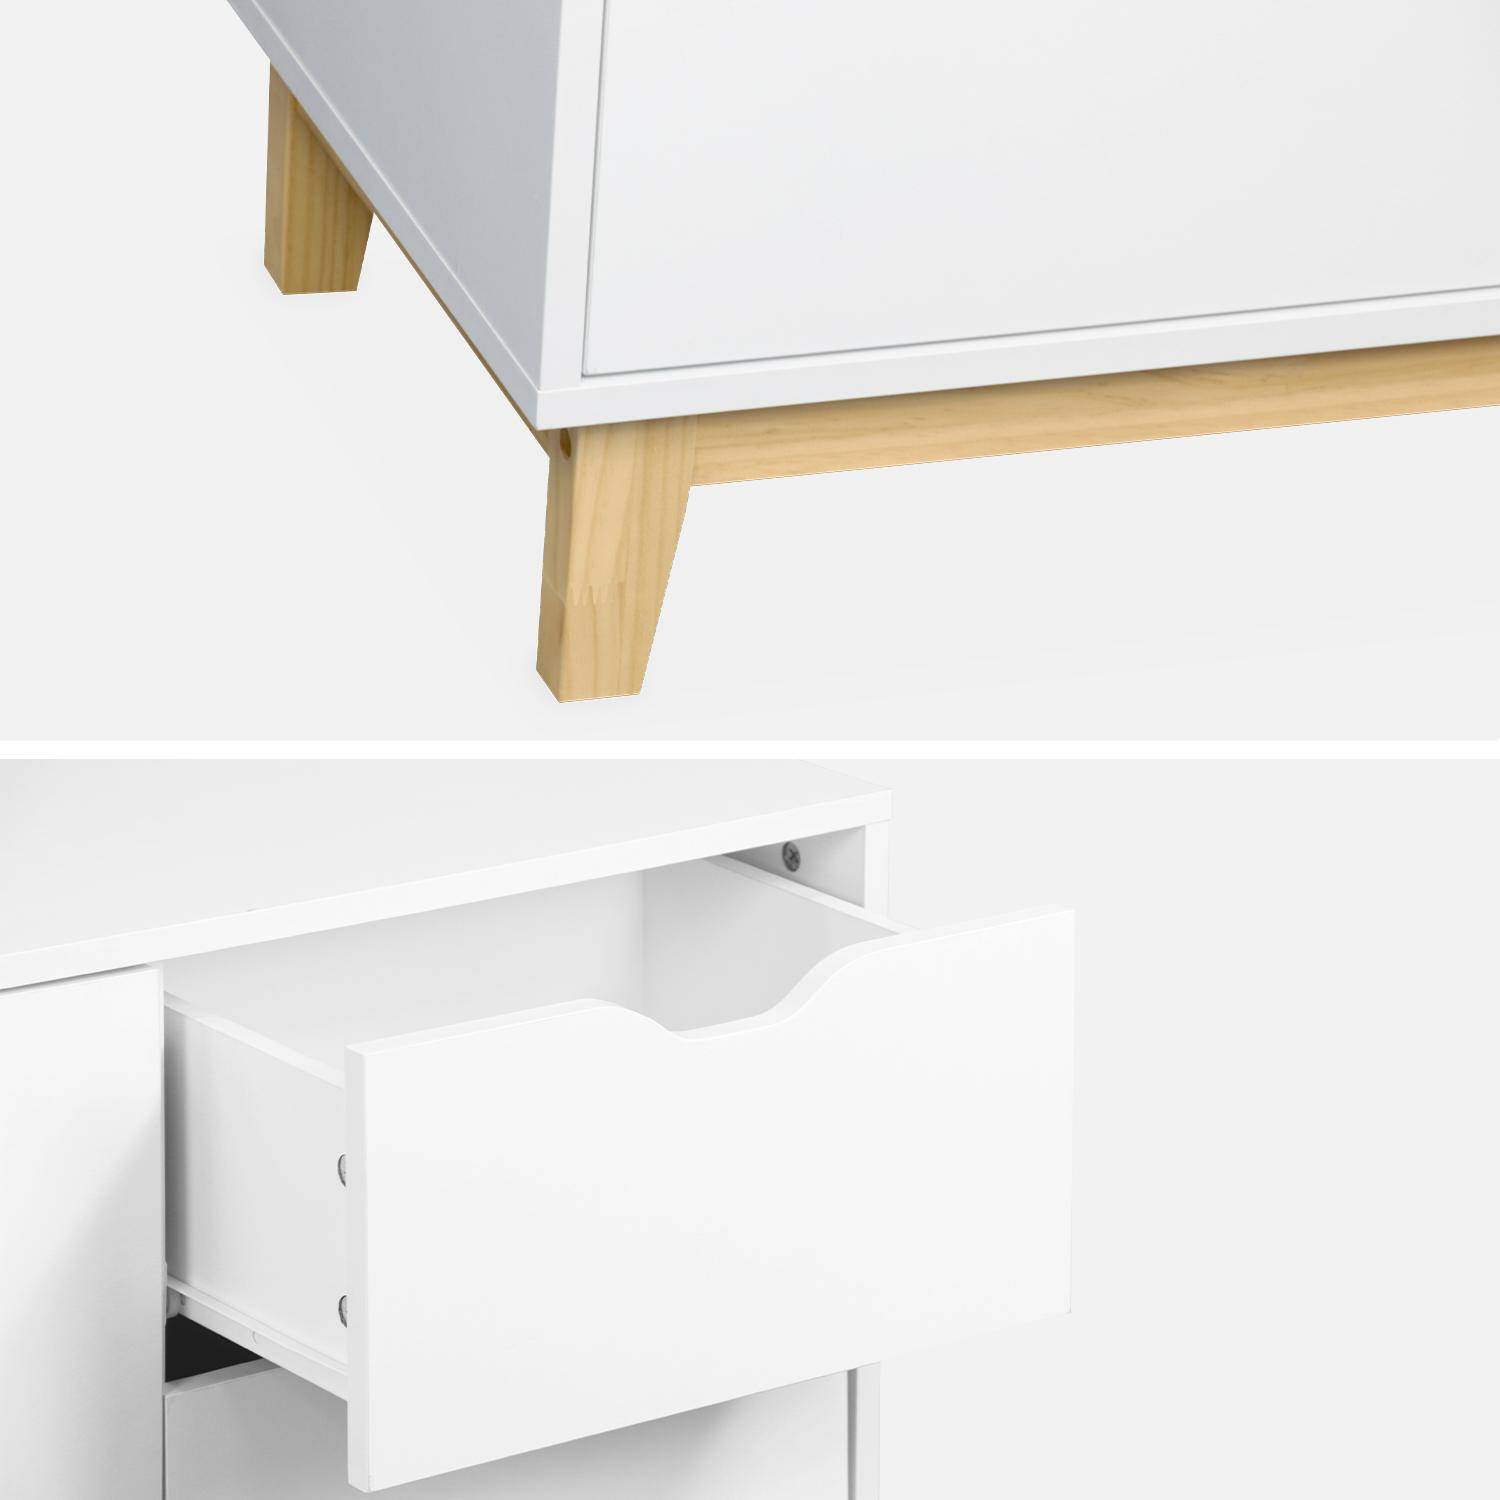 White bedside table with fir wood legs - Floki - 40 x 39 x 52cm - 1 drawer and 1 niche Photo6